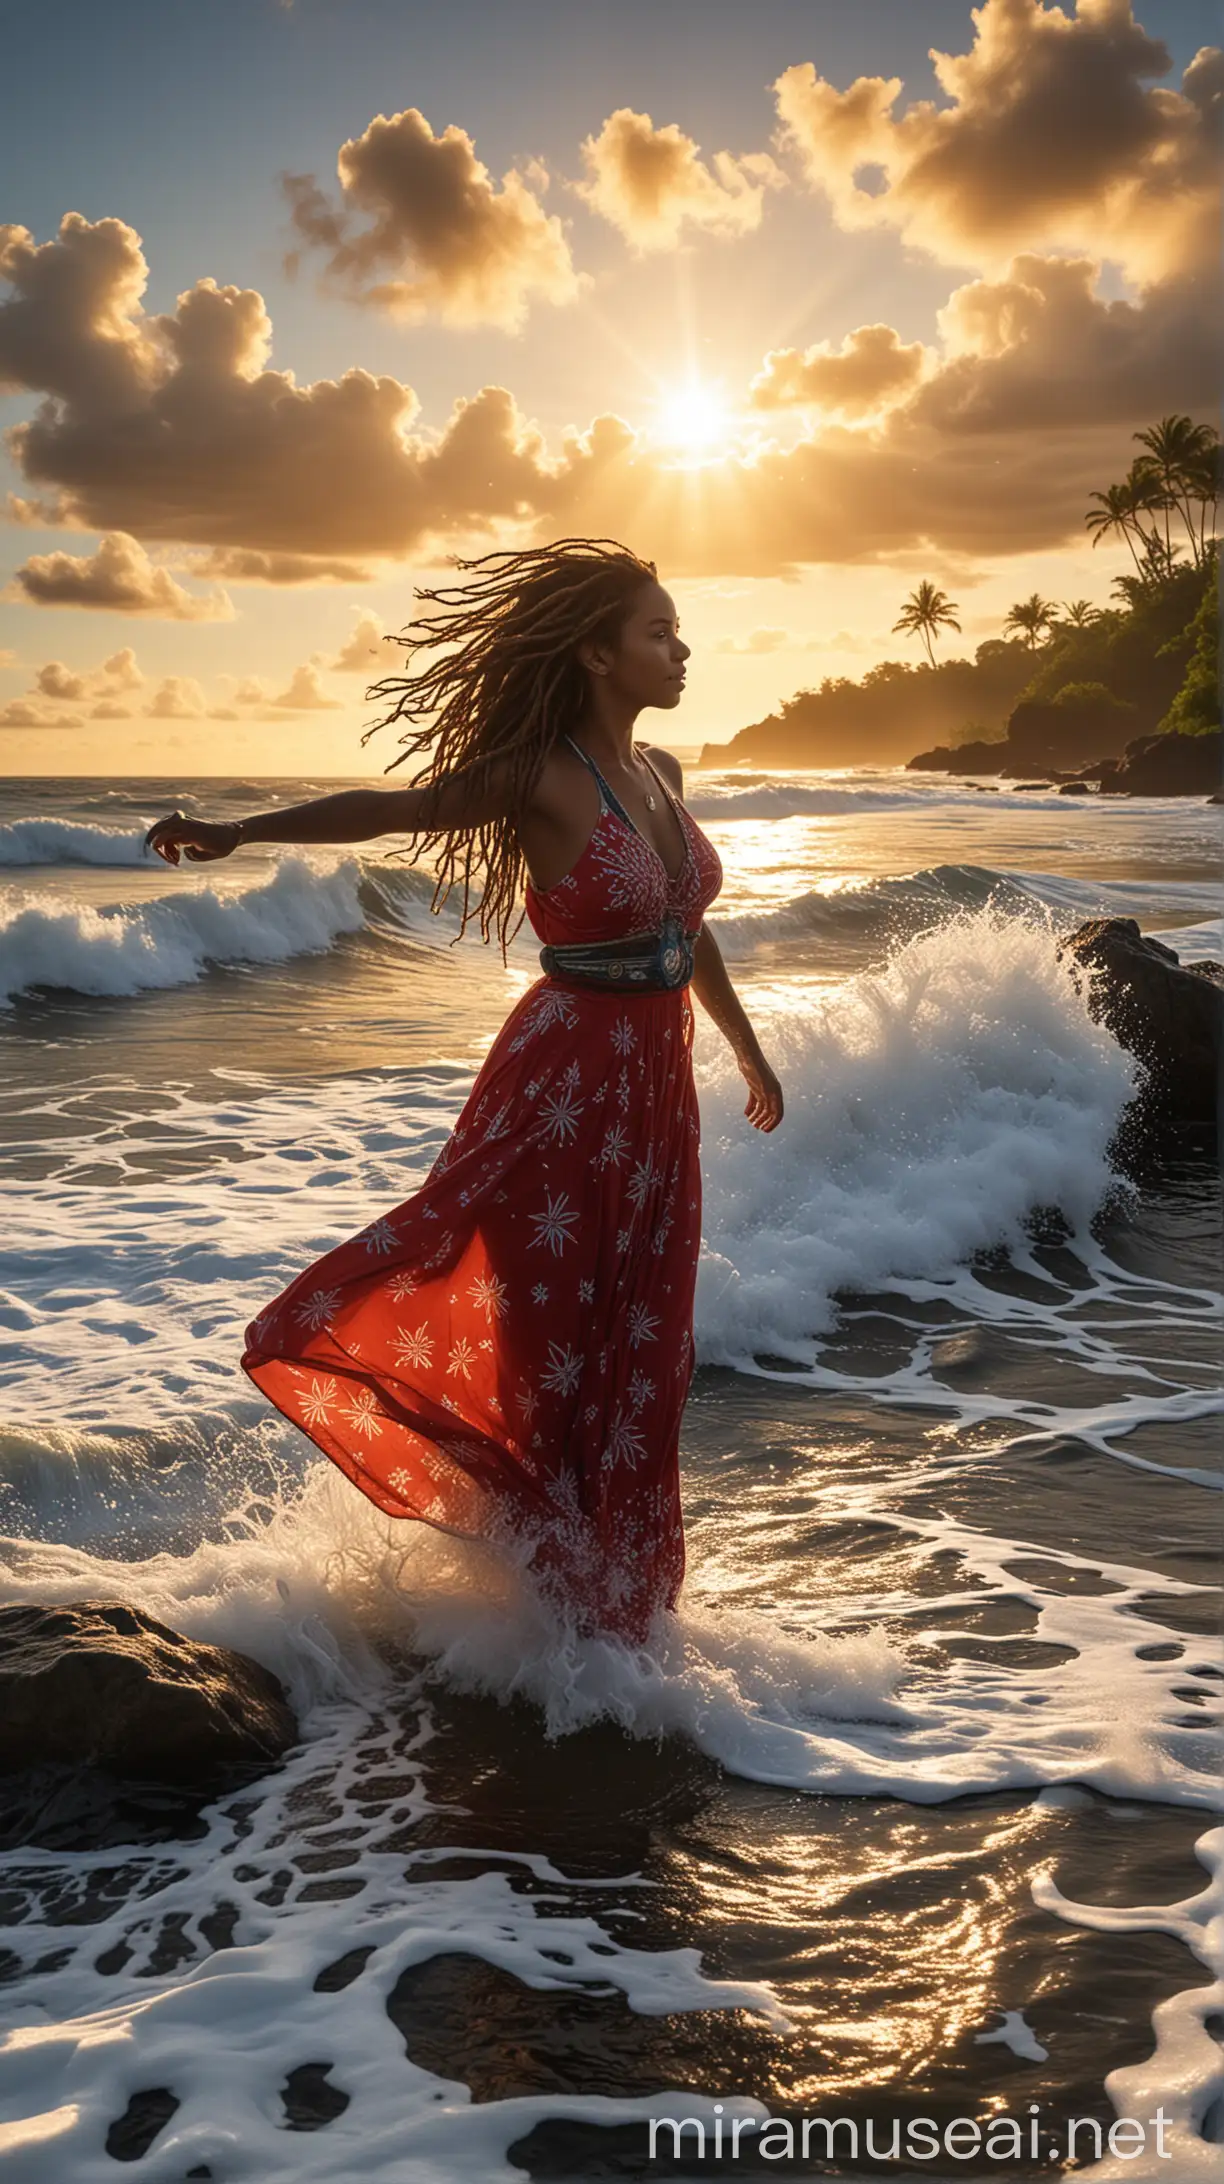 best quality, 8k, high resolution, masterpiece 1.2) very detailed, realistic {(National Geographic, underwater photography, 3D, HDR, UHD 16k photos), (Beautiful Papuan girl, about 20 to 25 years old, dreadlocks, brown skin white wearing a blue and red dress with star patterns), (dressfloating, water splashing, wet clothes splashed by big waves), (white surf, big waves, sunset, sea, trees, rocks, islands, bright and perfectly puffy clouds, dramatic golden crepuscular rays)}